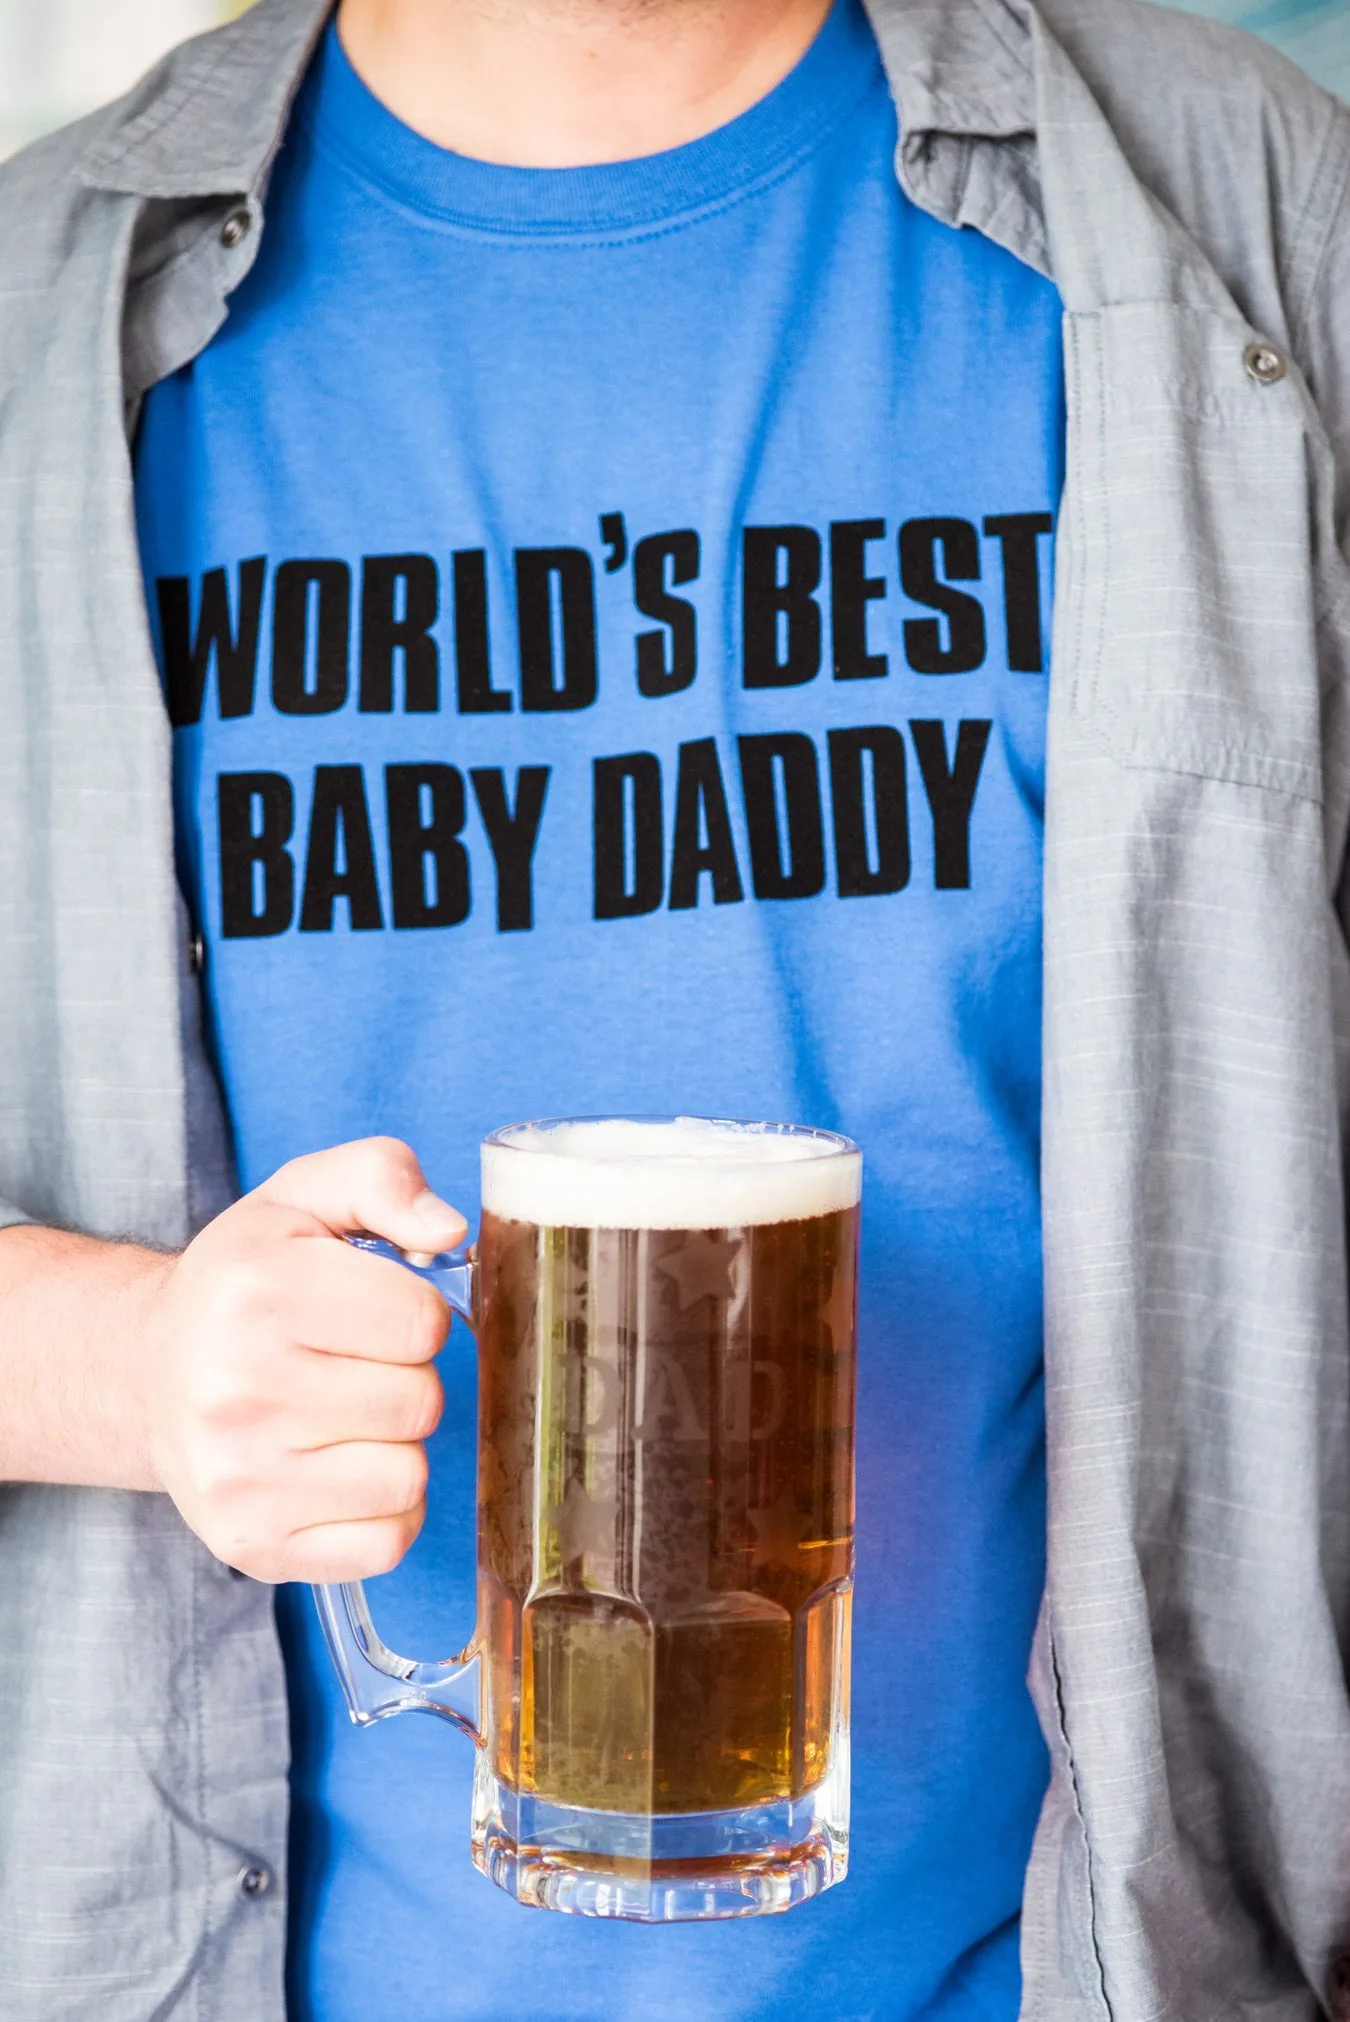 DIY Graphic Father's Day Shirts | Homemade gift ideas, Father's Day ideas, Father's Day gifts and more from @cydconverse